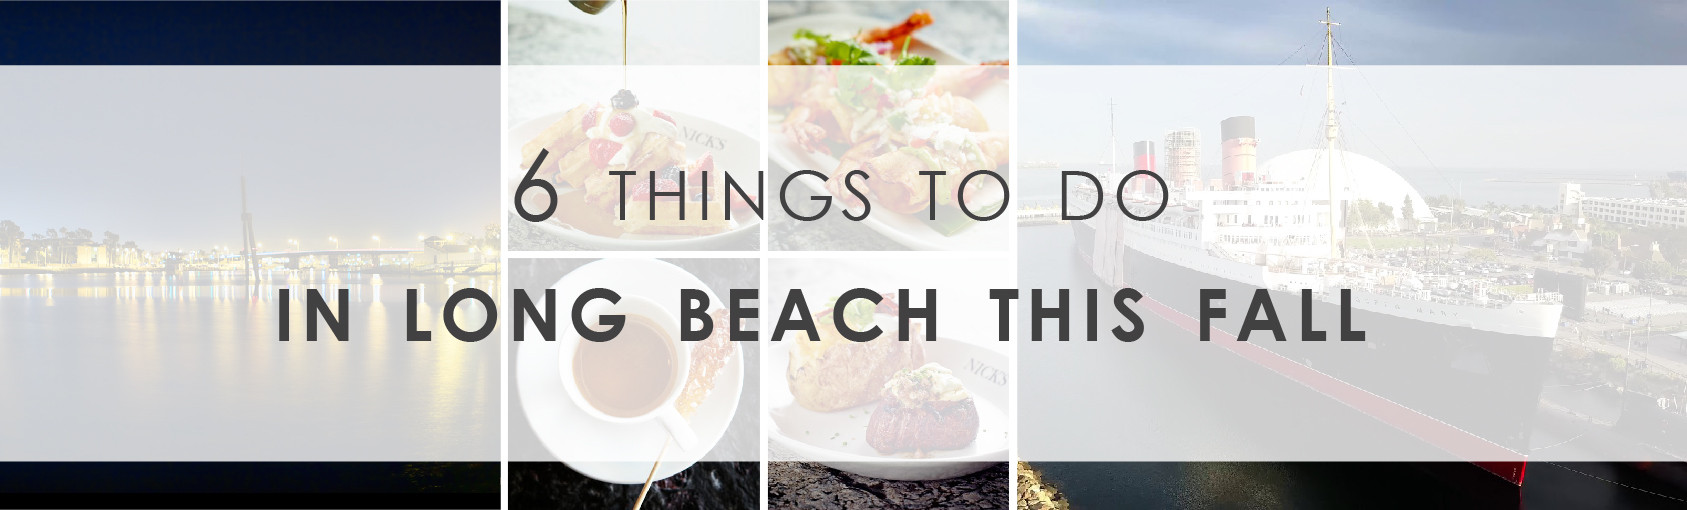 6 Things to Do in LB This Fall Banner